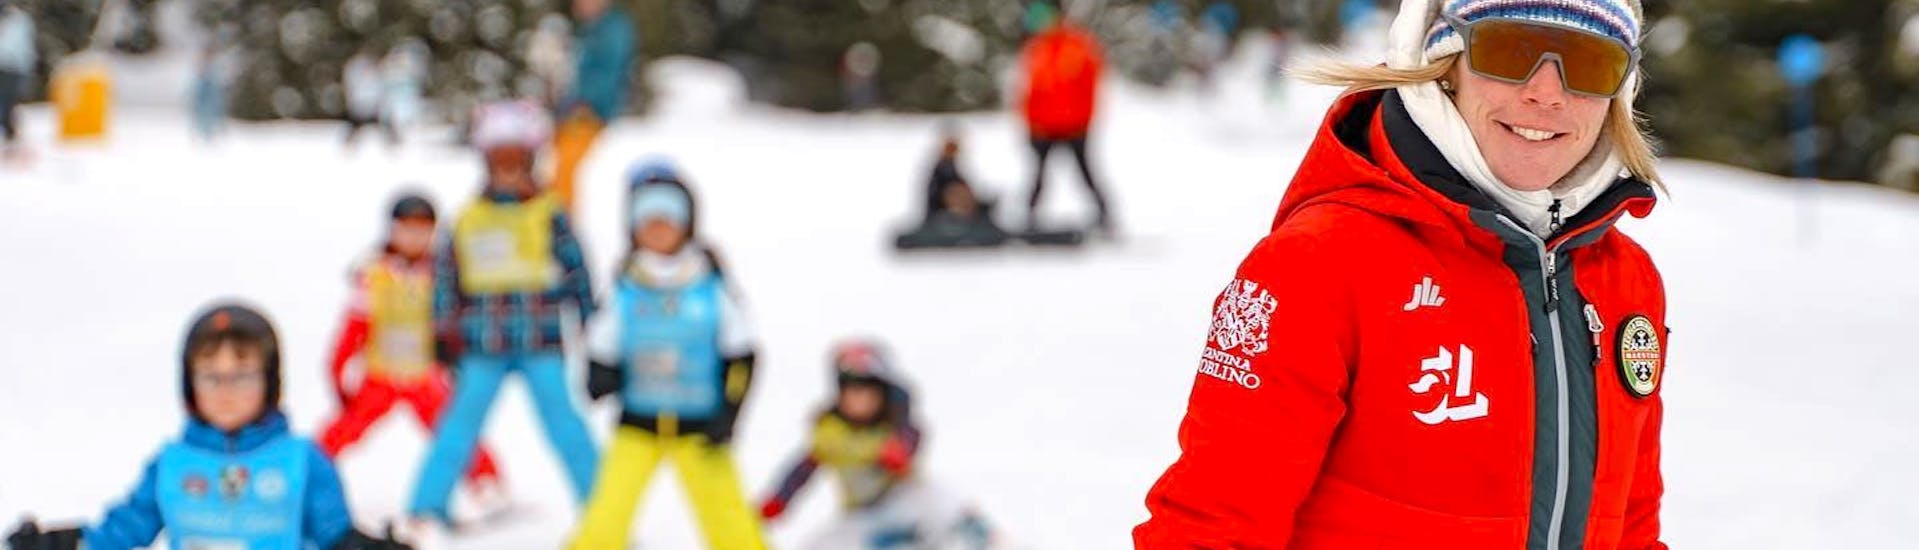 Kids Ski Lessons (4-13 y.) for All Levels - Full Day.